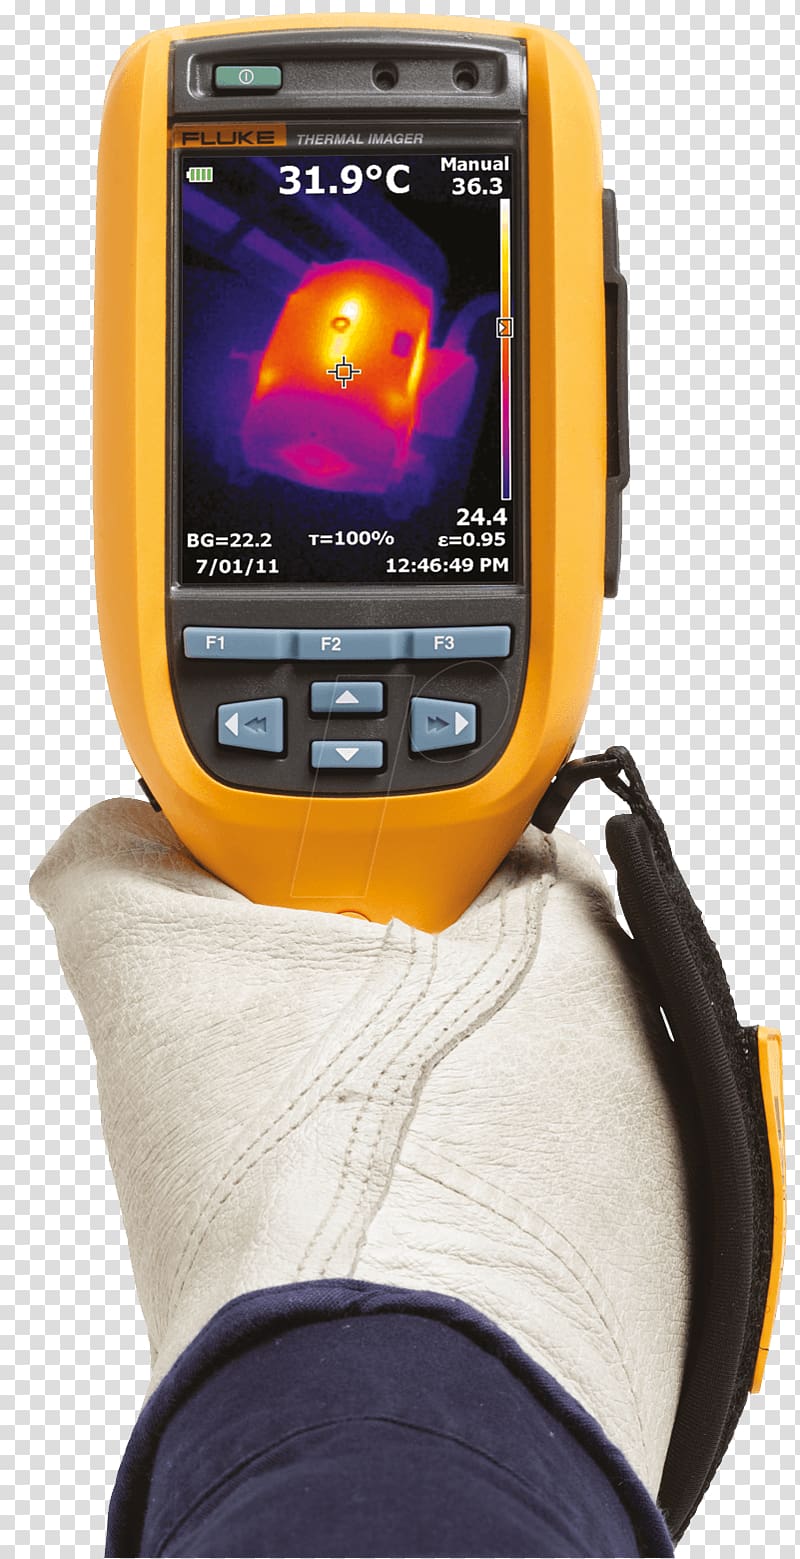 Thermographic camera Thermal imaging camera Thermography Infrared, Camera transparent background PNG clipart